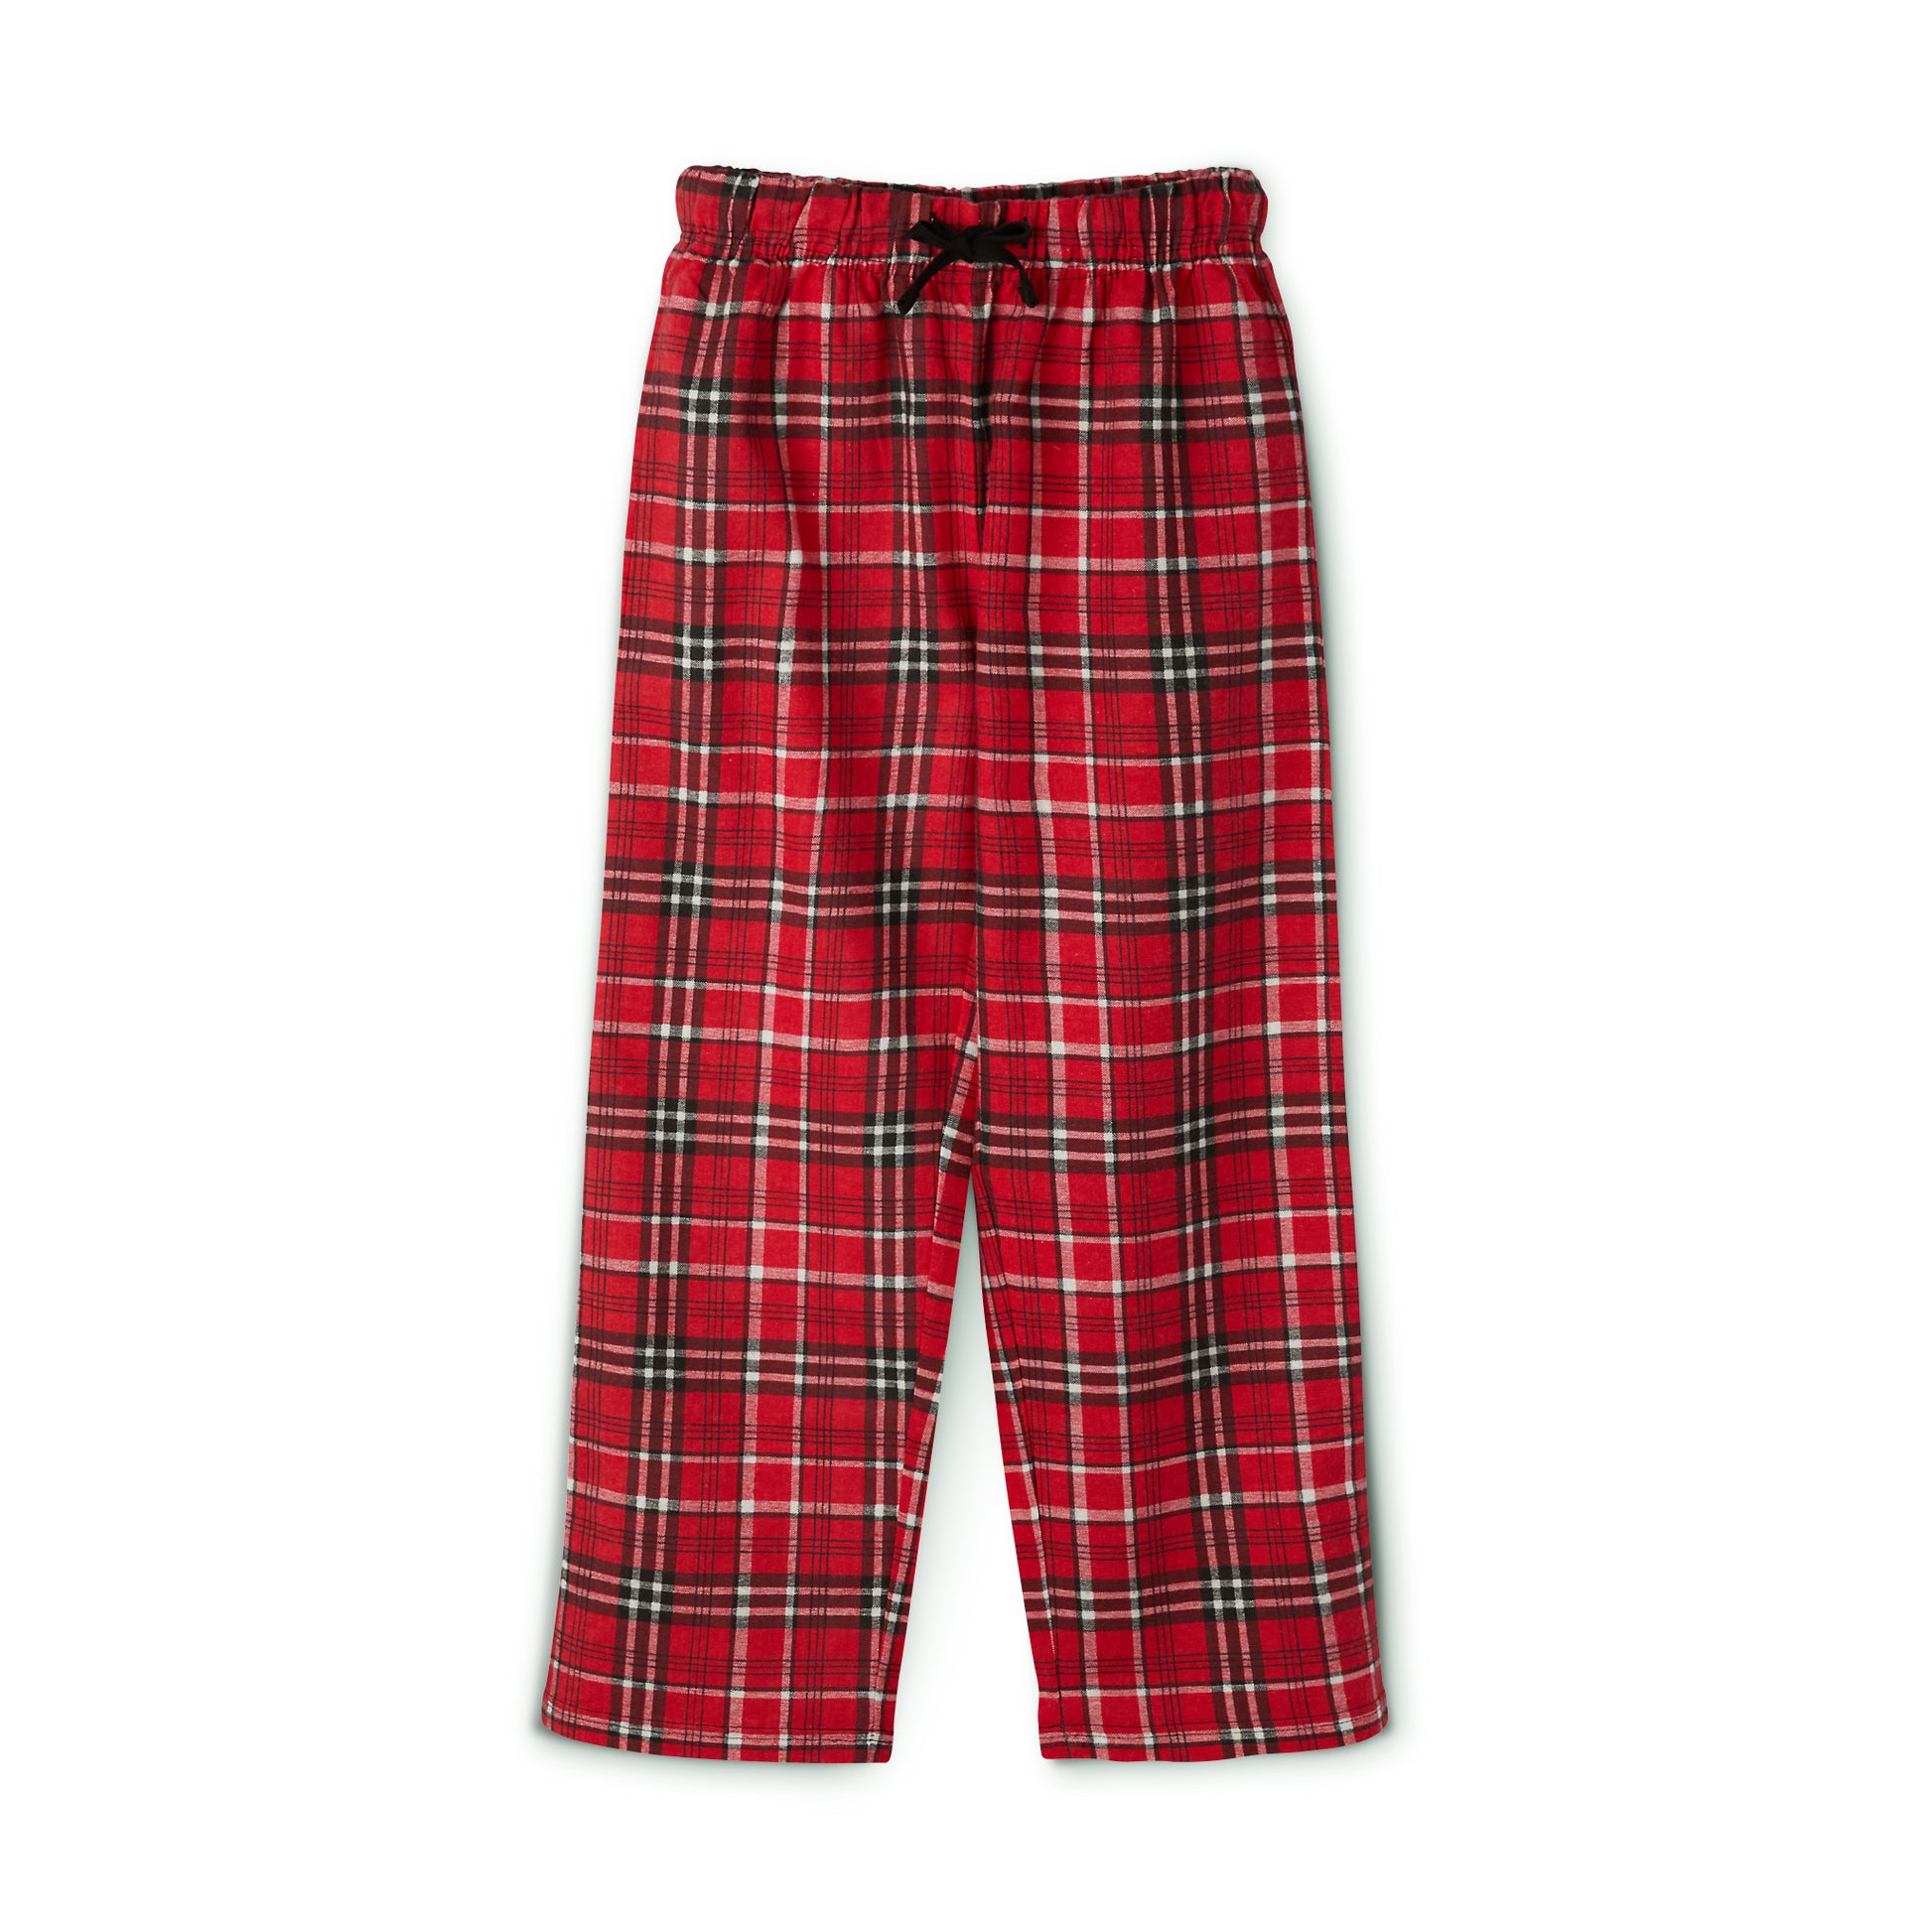 Red and black plaid Unisex-Youth Matching-Family Pajamas in 100% cotton by Printify.